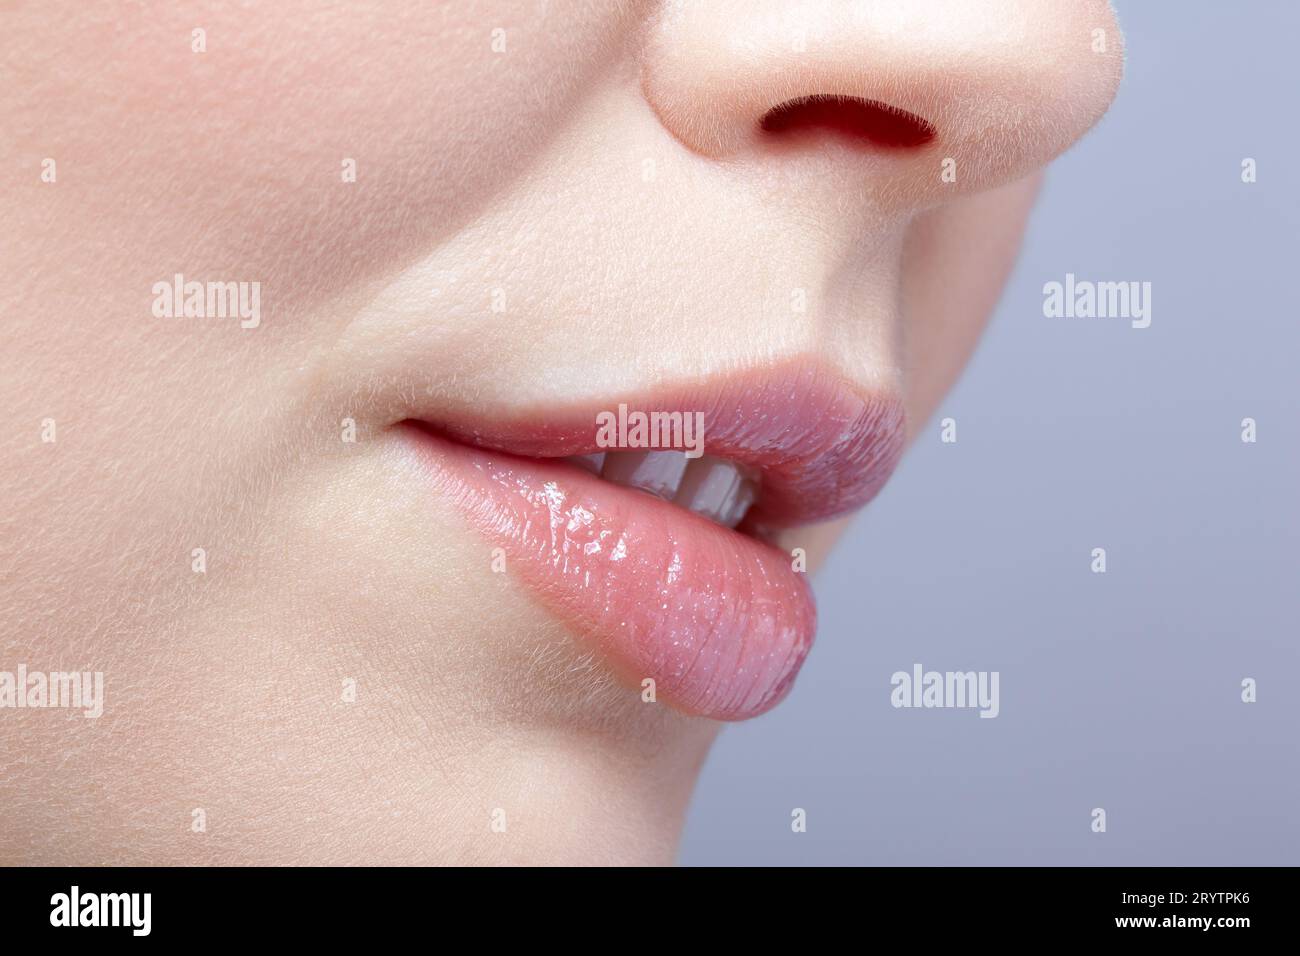 Human mouth and nose. Closeup macro portrait of female part of face. Woman lips with day beauty makeup. Stock Photo